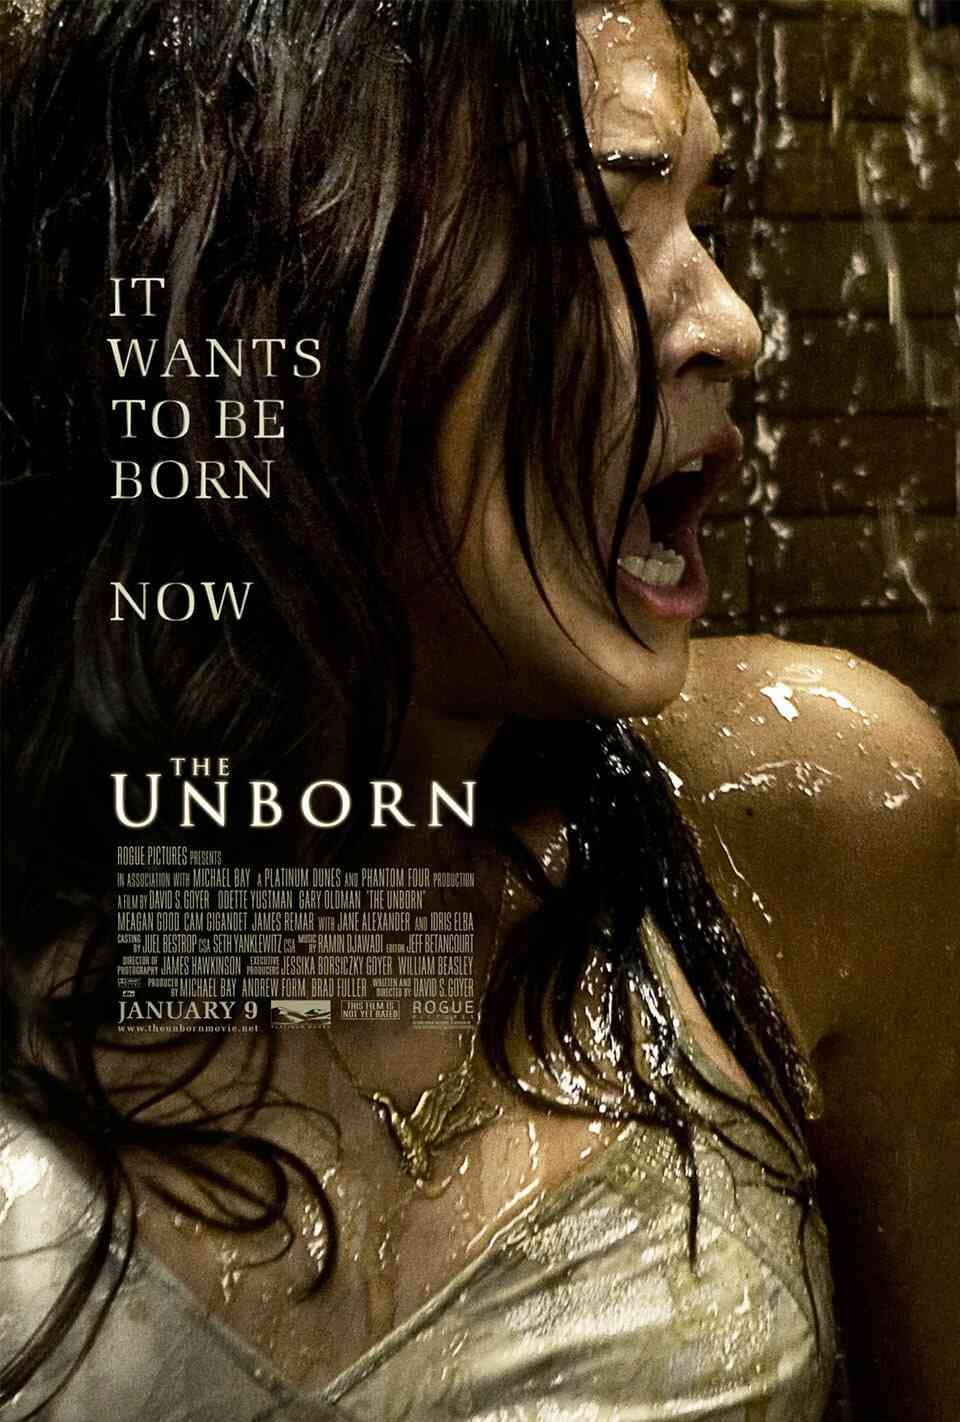 Read The Unborn screenplay (poster)